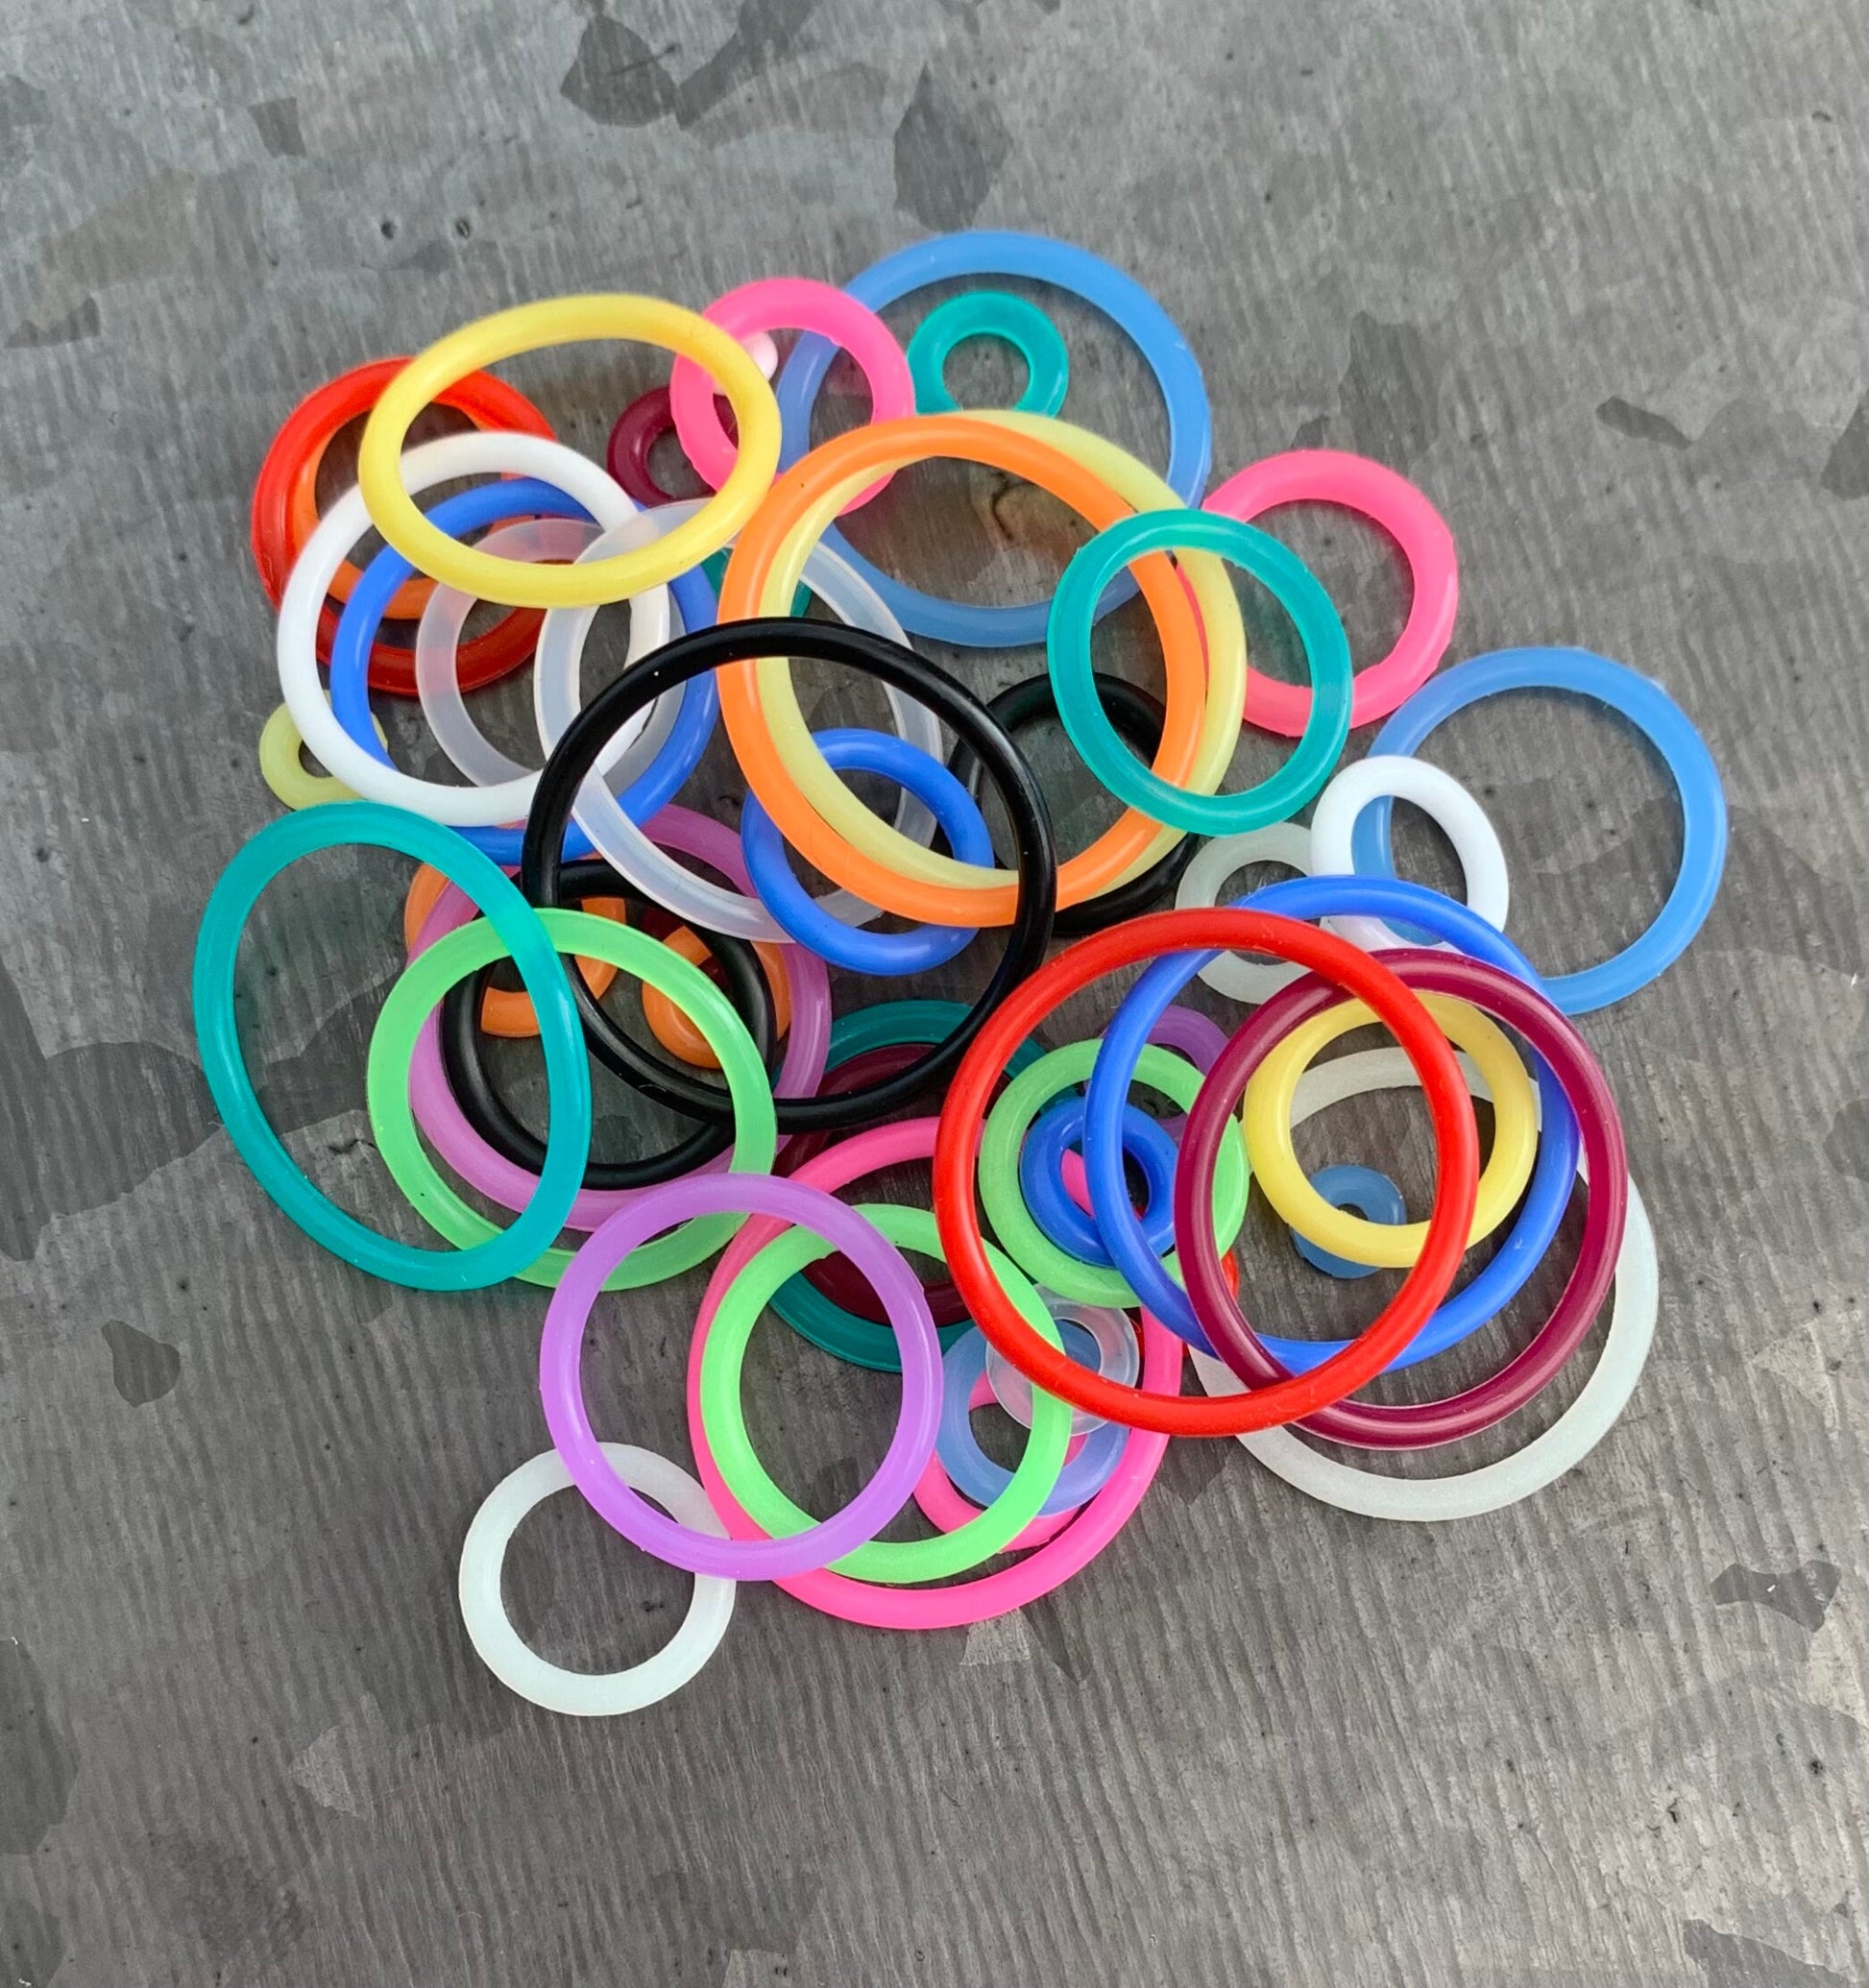 10 pack of Blue Replacement O-Rings Bands for Plugs or Tunnels - 13 more colors available!